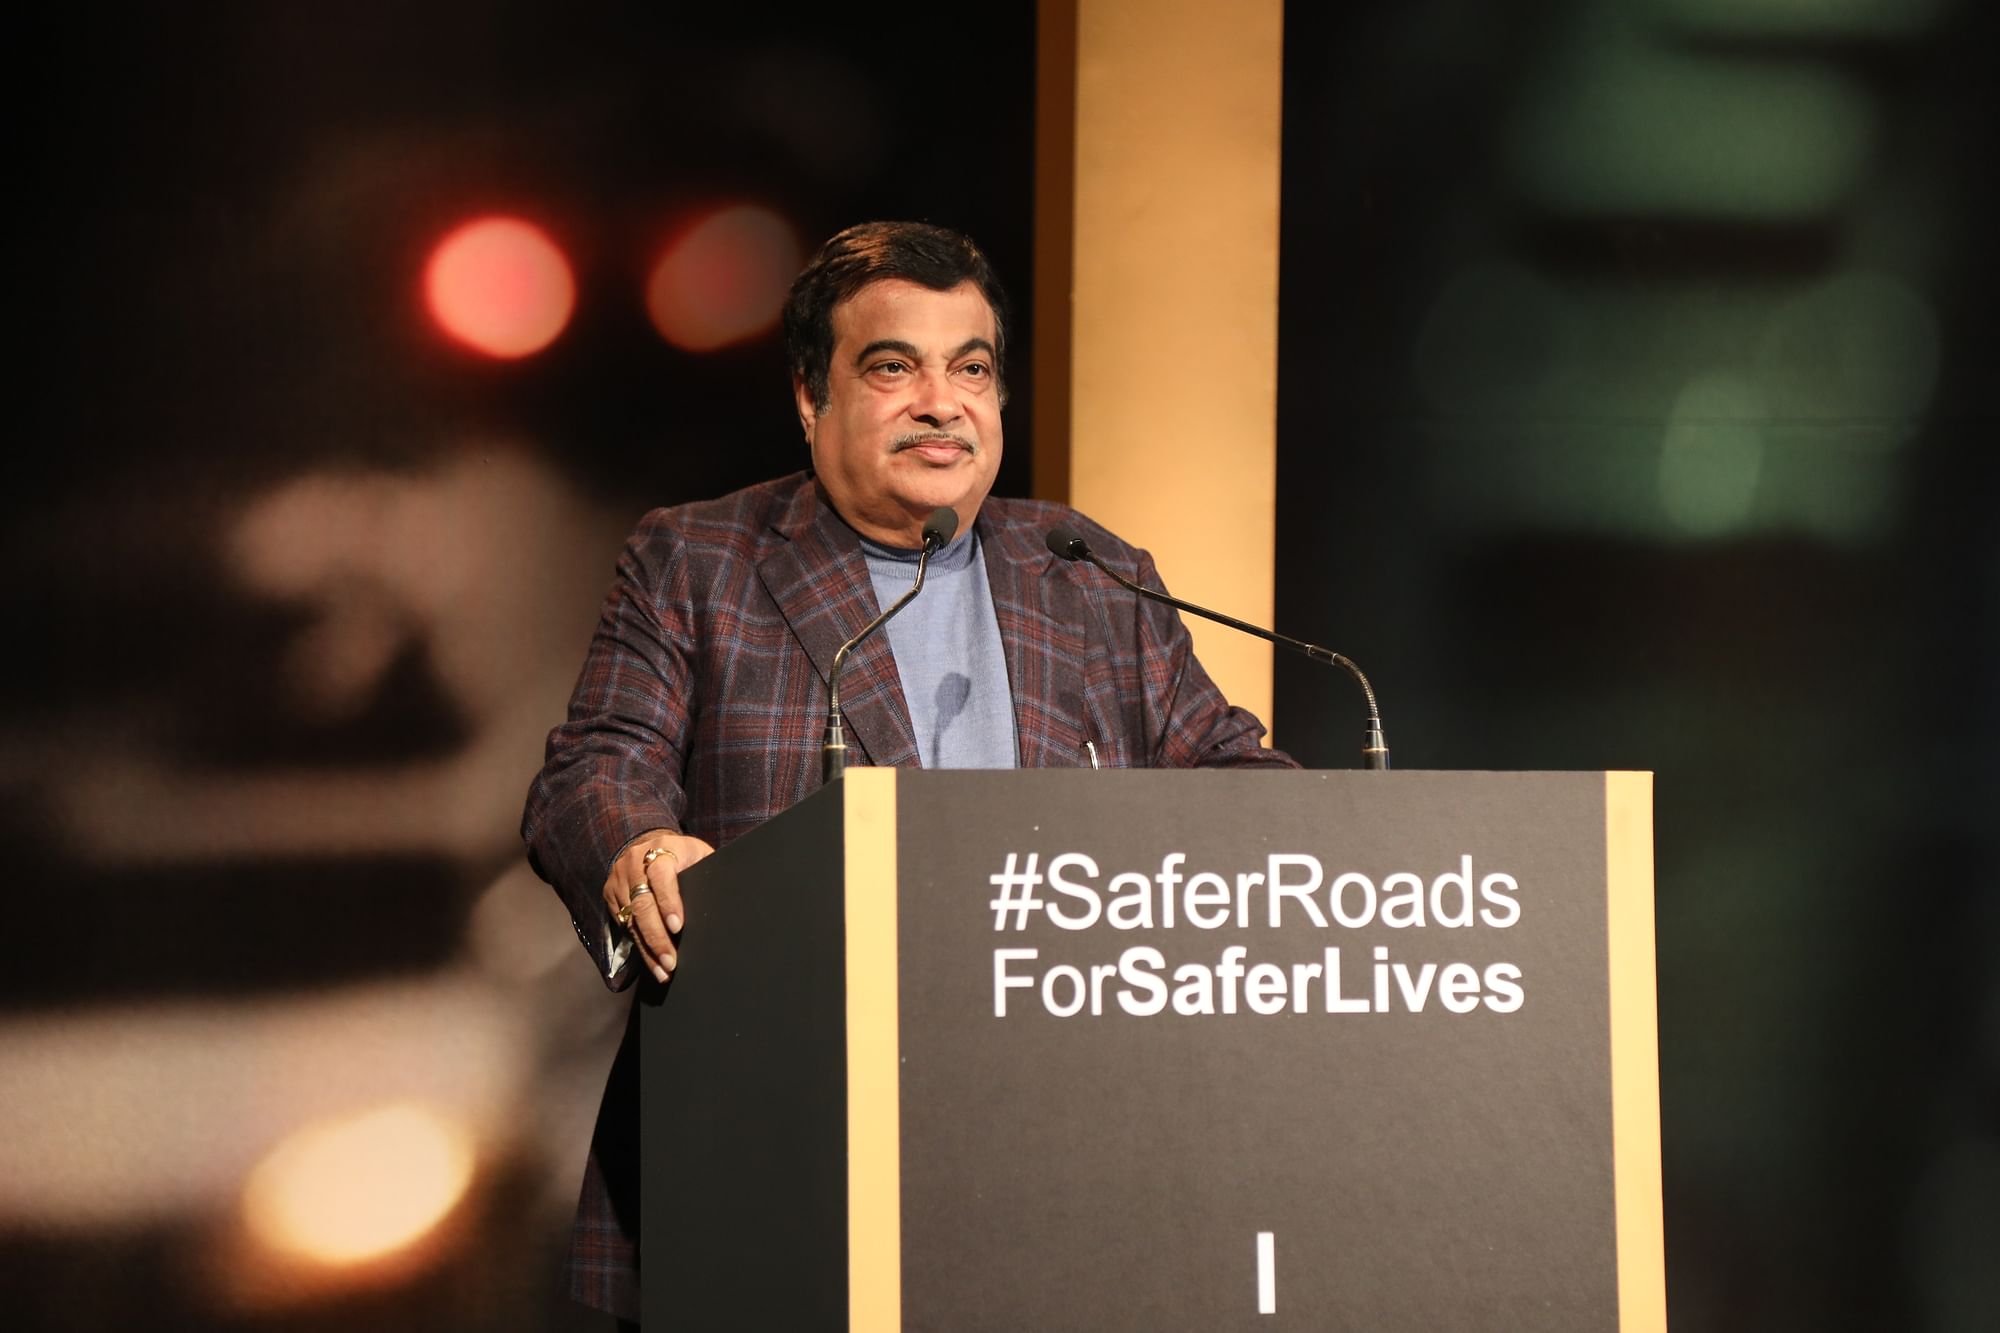 SRFG hosted the ‘SaferRoadsforSaferLives’ initiative in association with The Quint where Nitin Gadkari, Union Minister of Road Transport and Highways, launched a road safety data dashboard for the city of Gurugram.